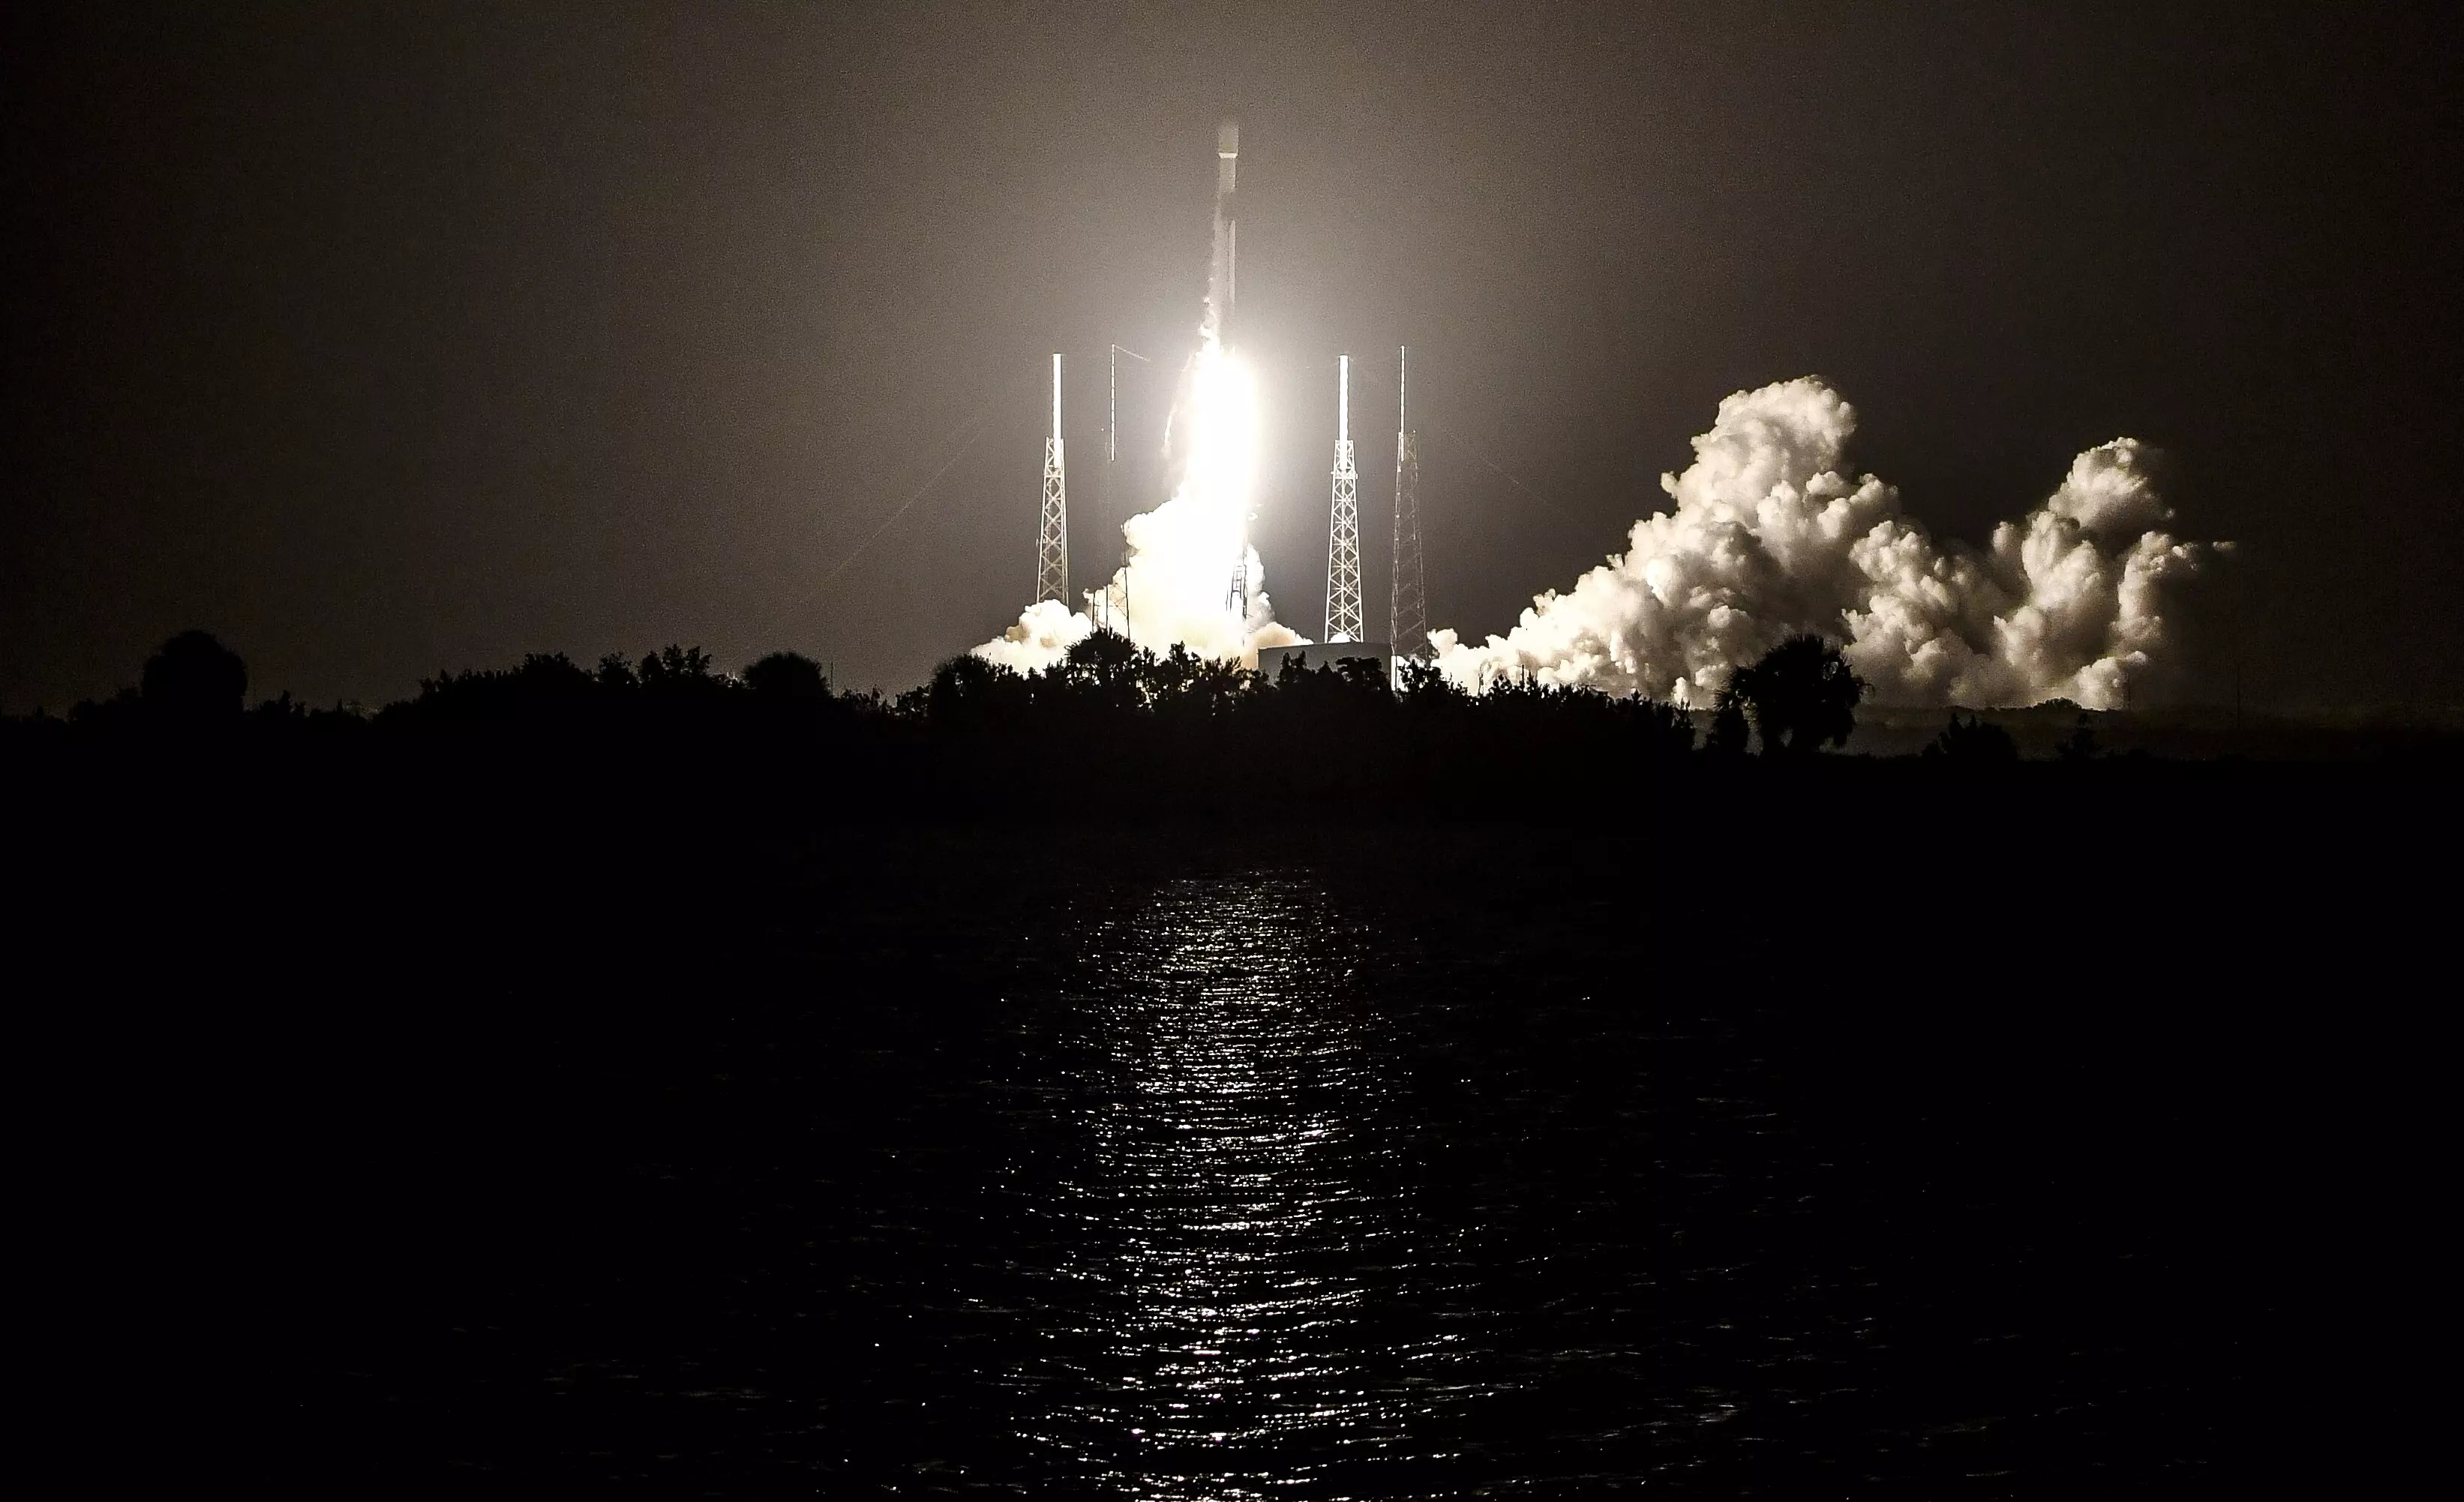 SpaceX launched a Falcon 9 rocket earlier this month.